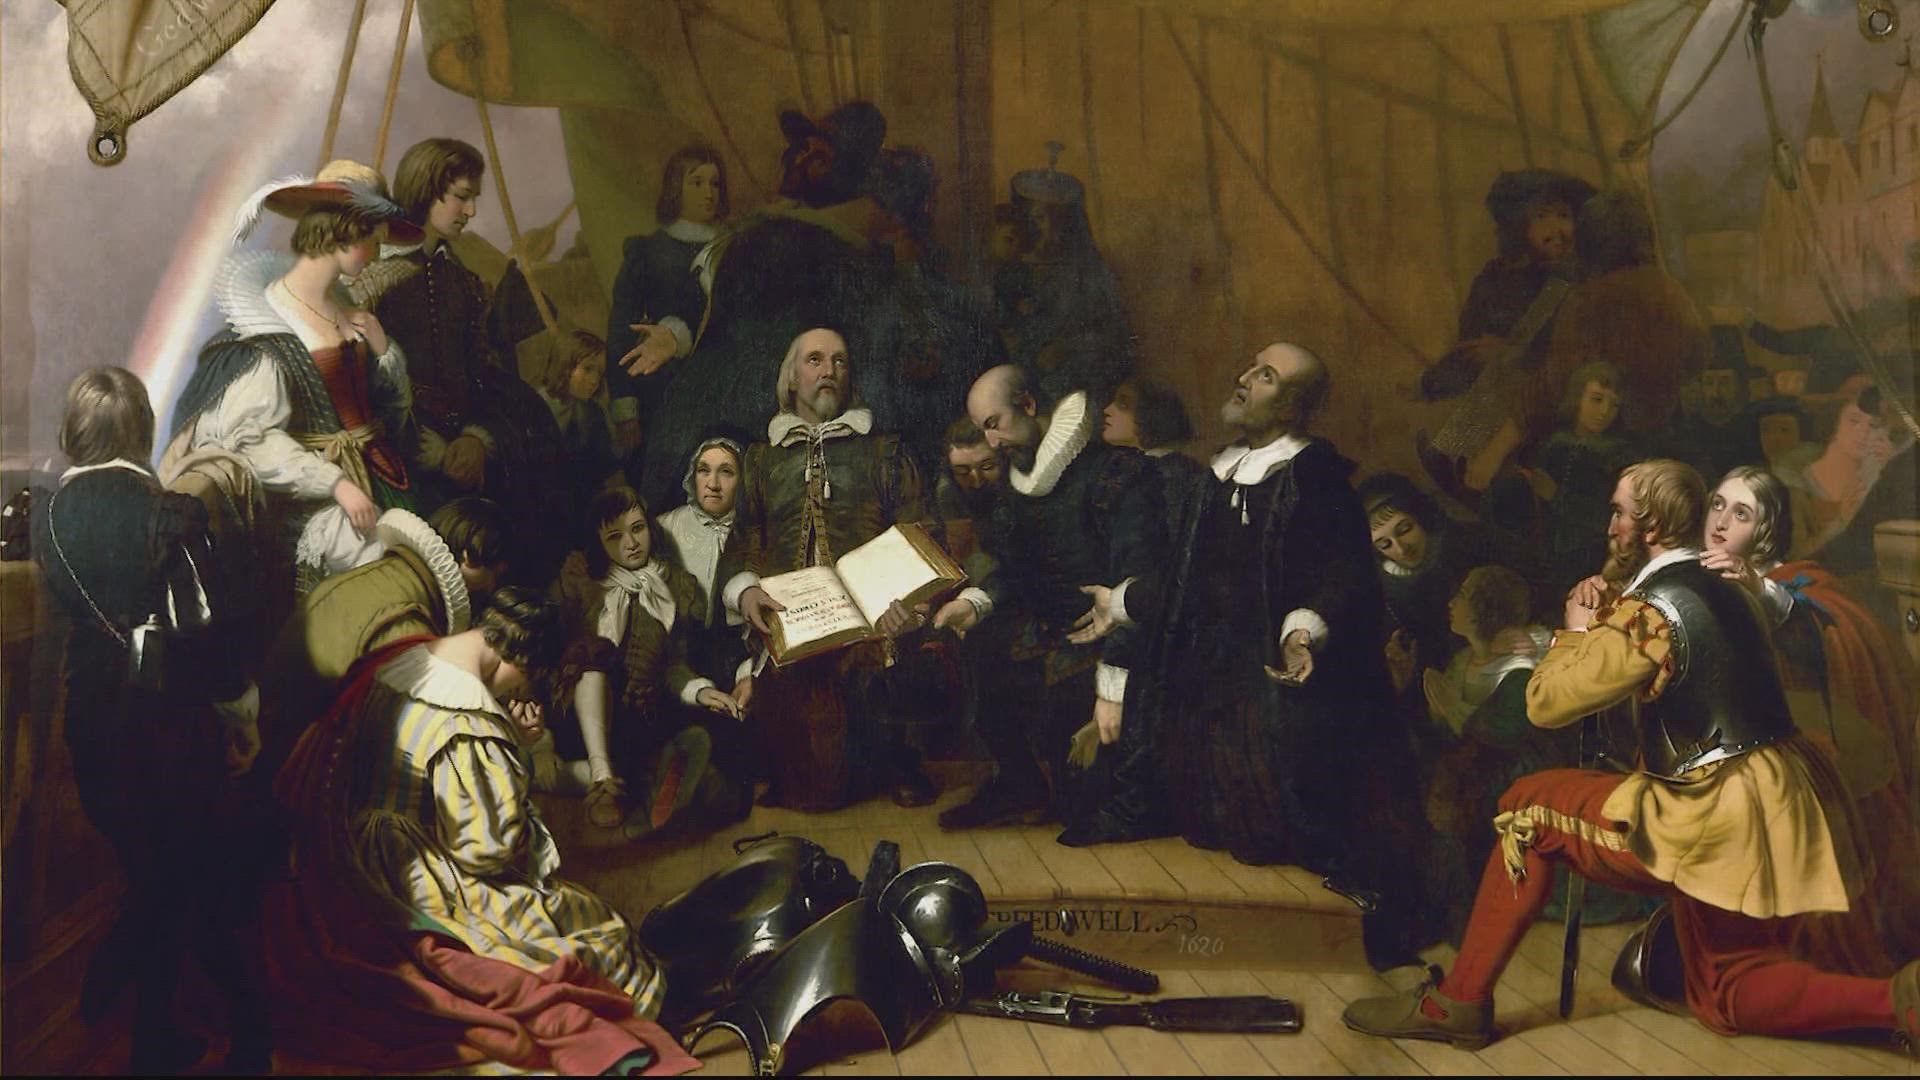 On this day in history, a group of pilgrims set sail aboard the Mayflower